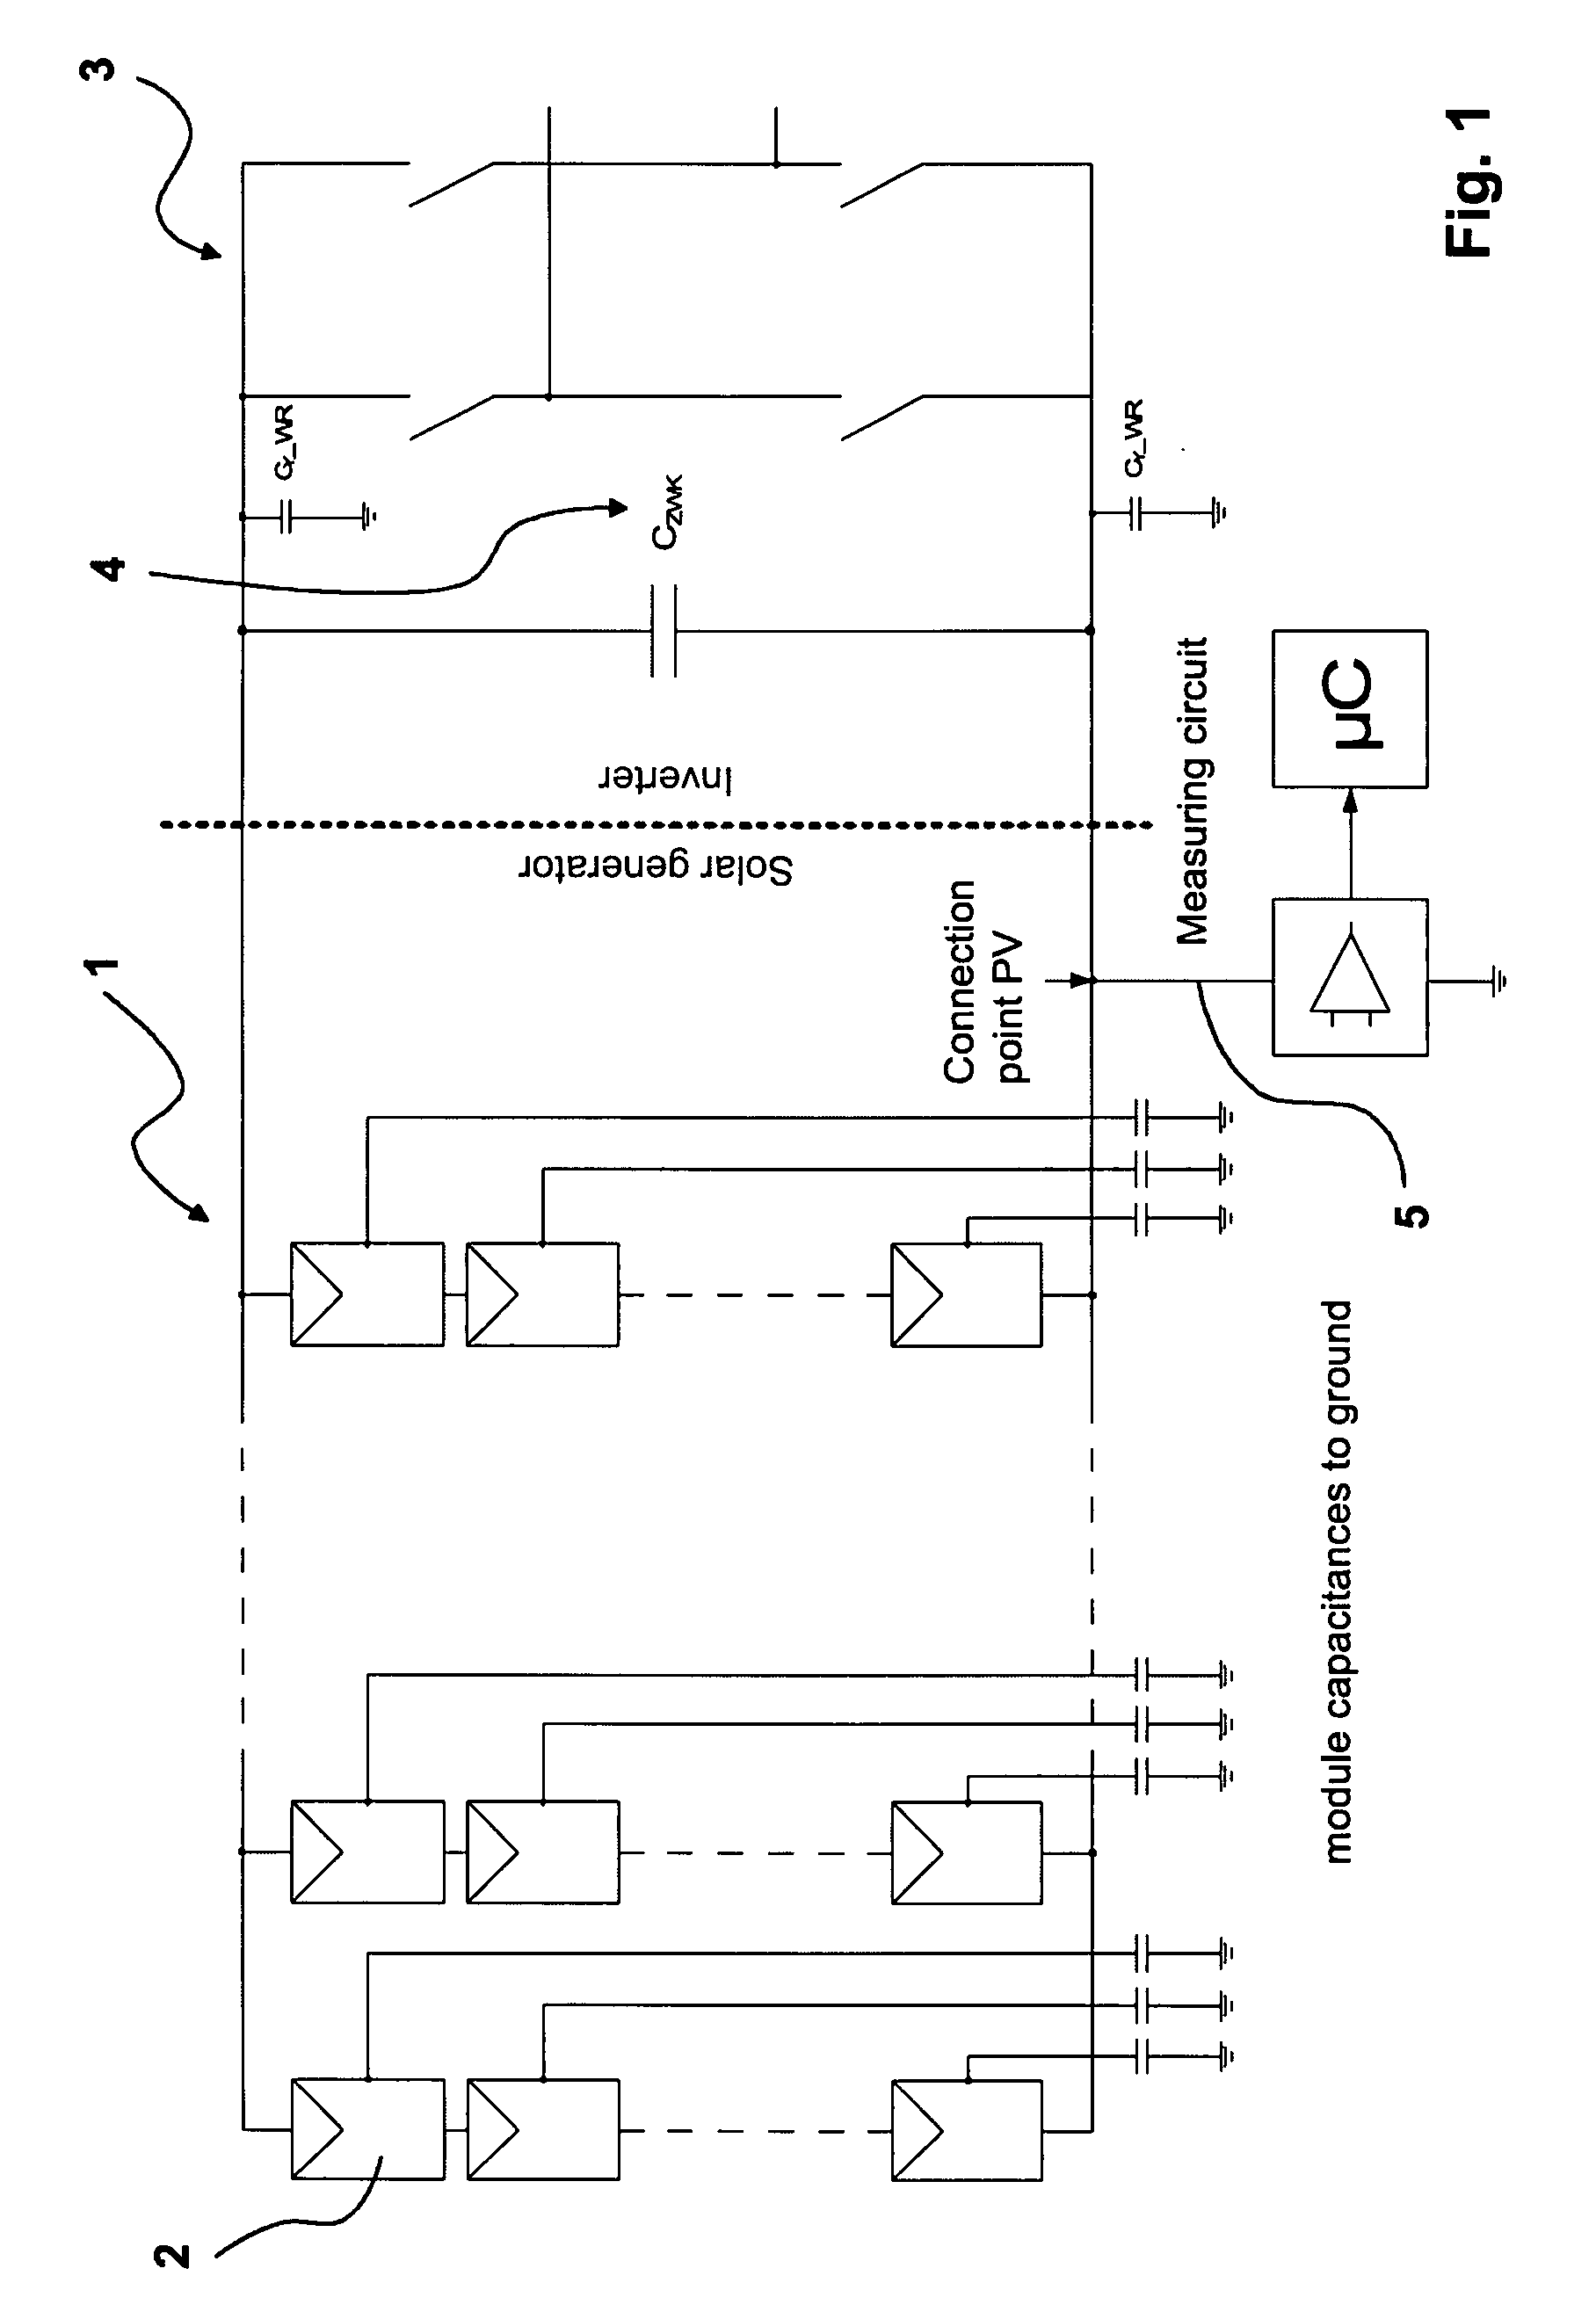 Method of monitoring a photovoltaic generator